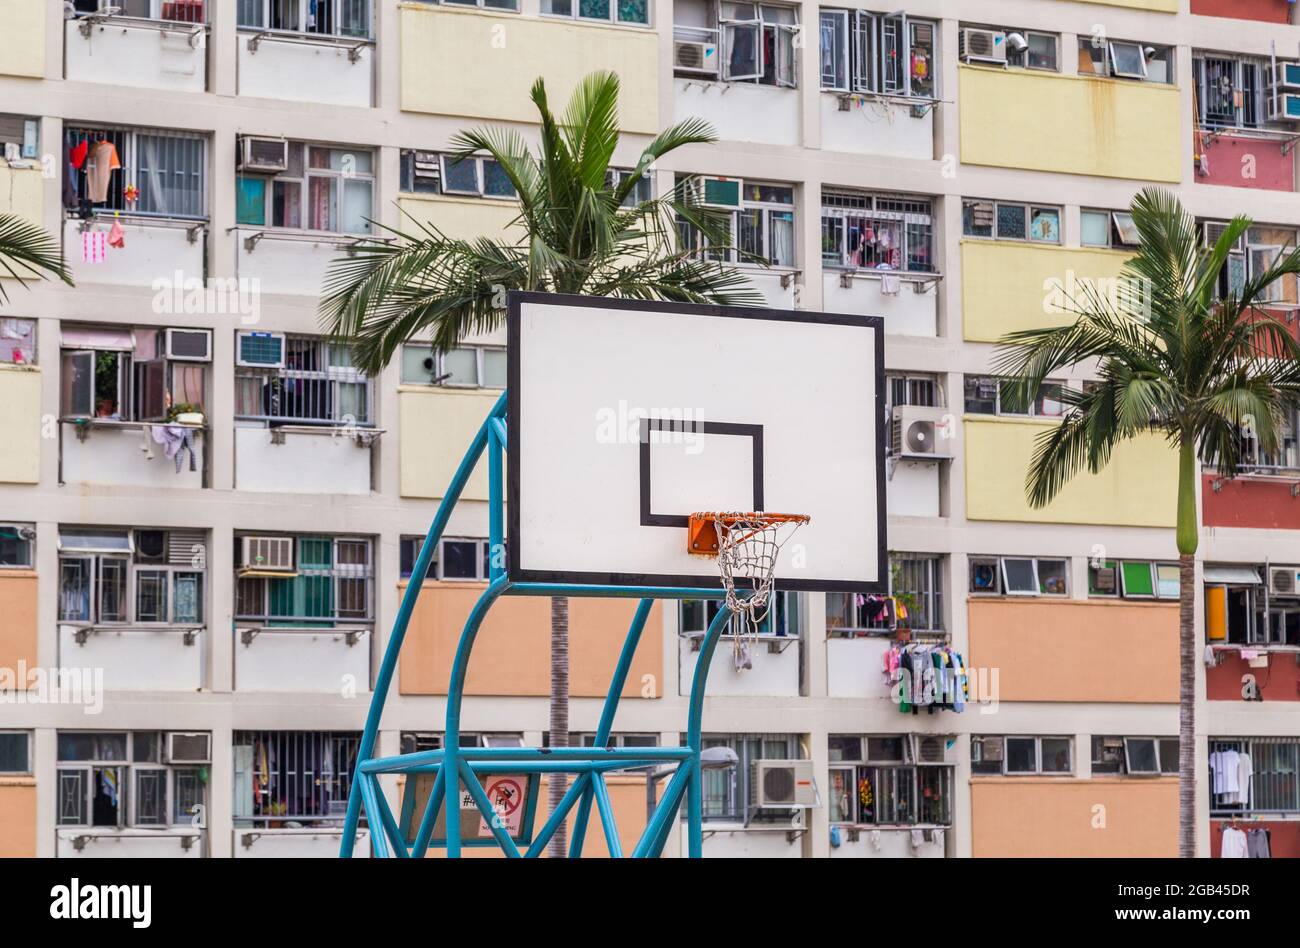 Closeup to a basketball hoop with colourful facades in the background in Hong Kong. Stock Photo